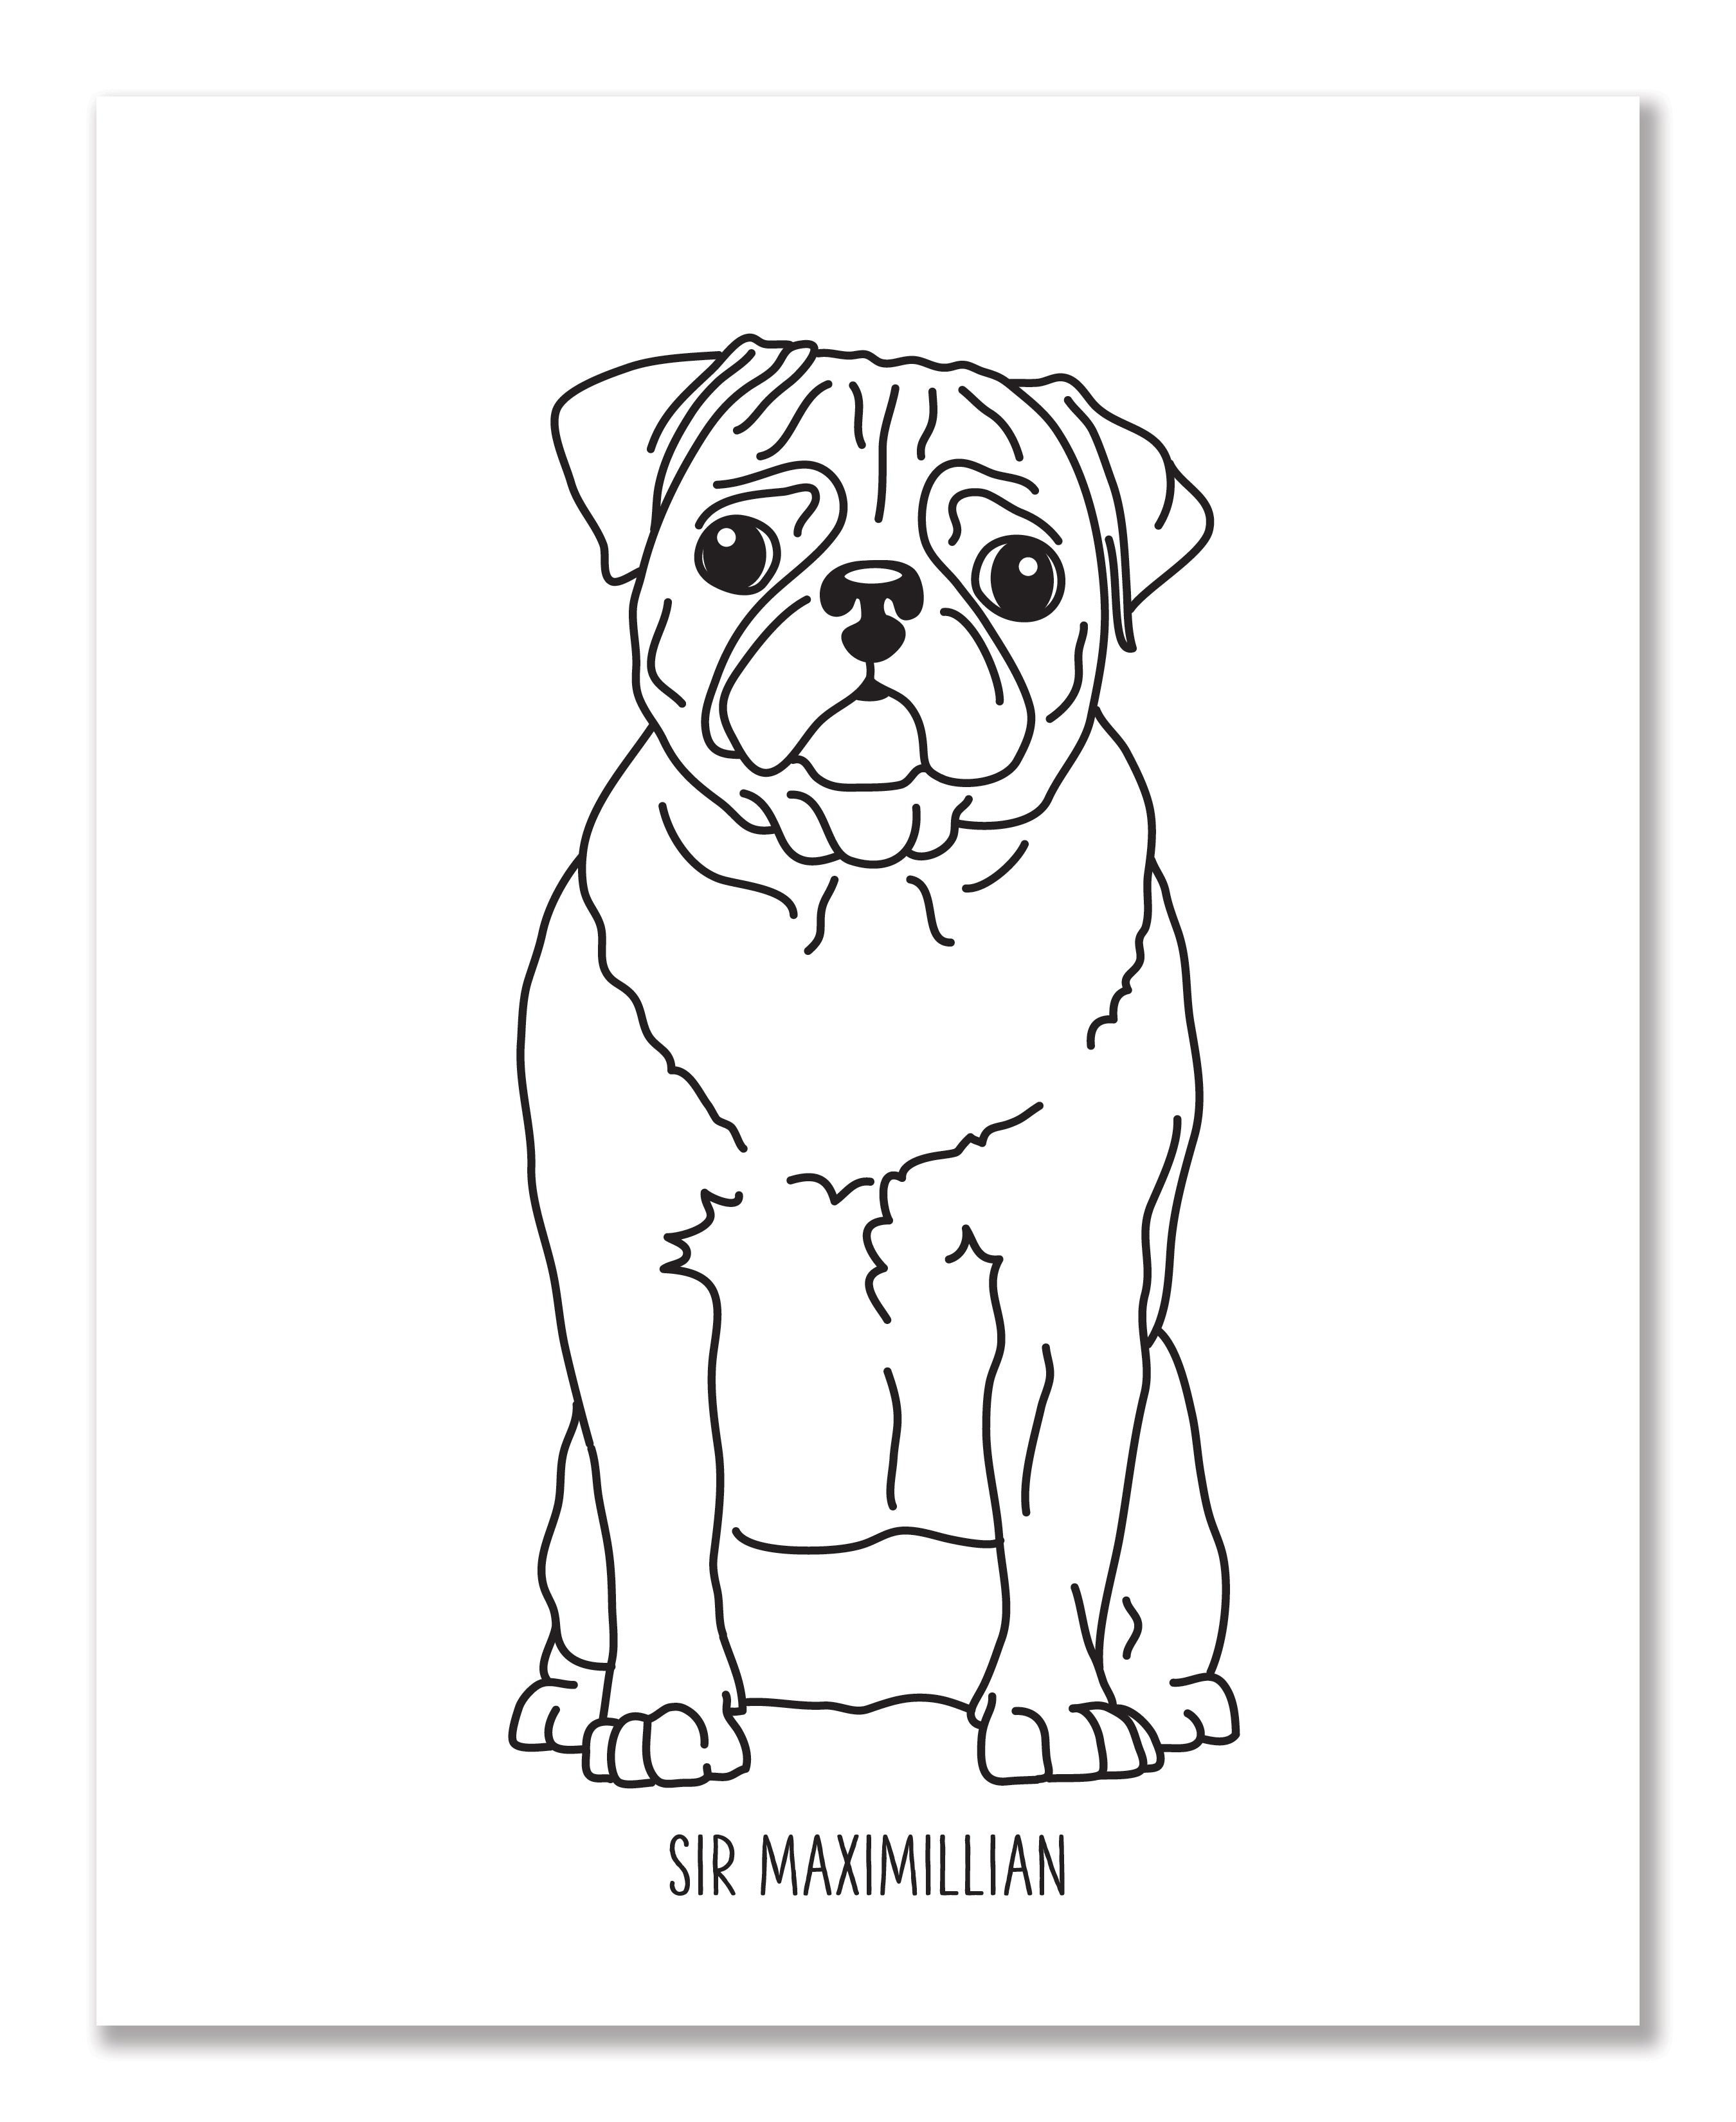 A line drawing of a pug with a custom title